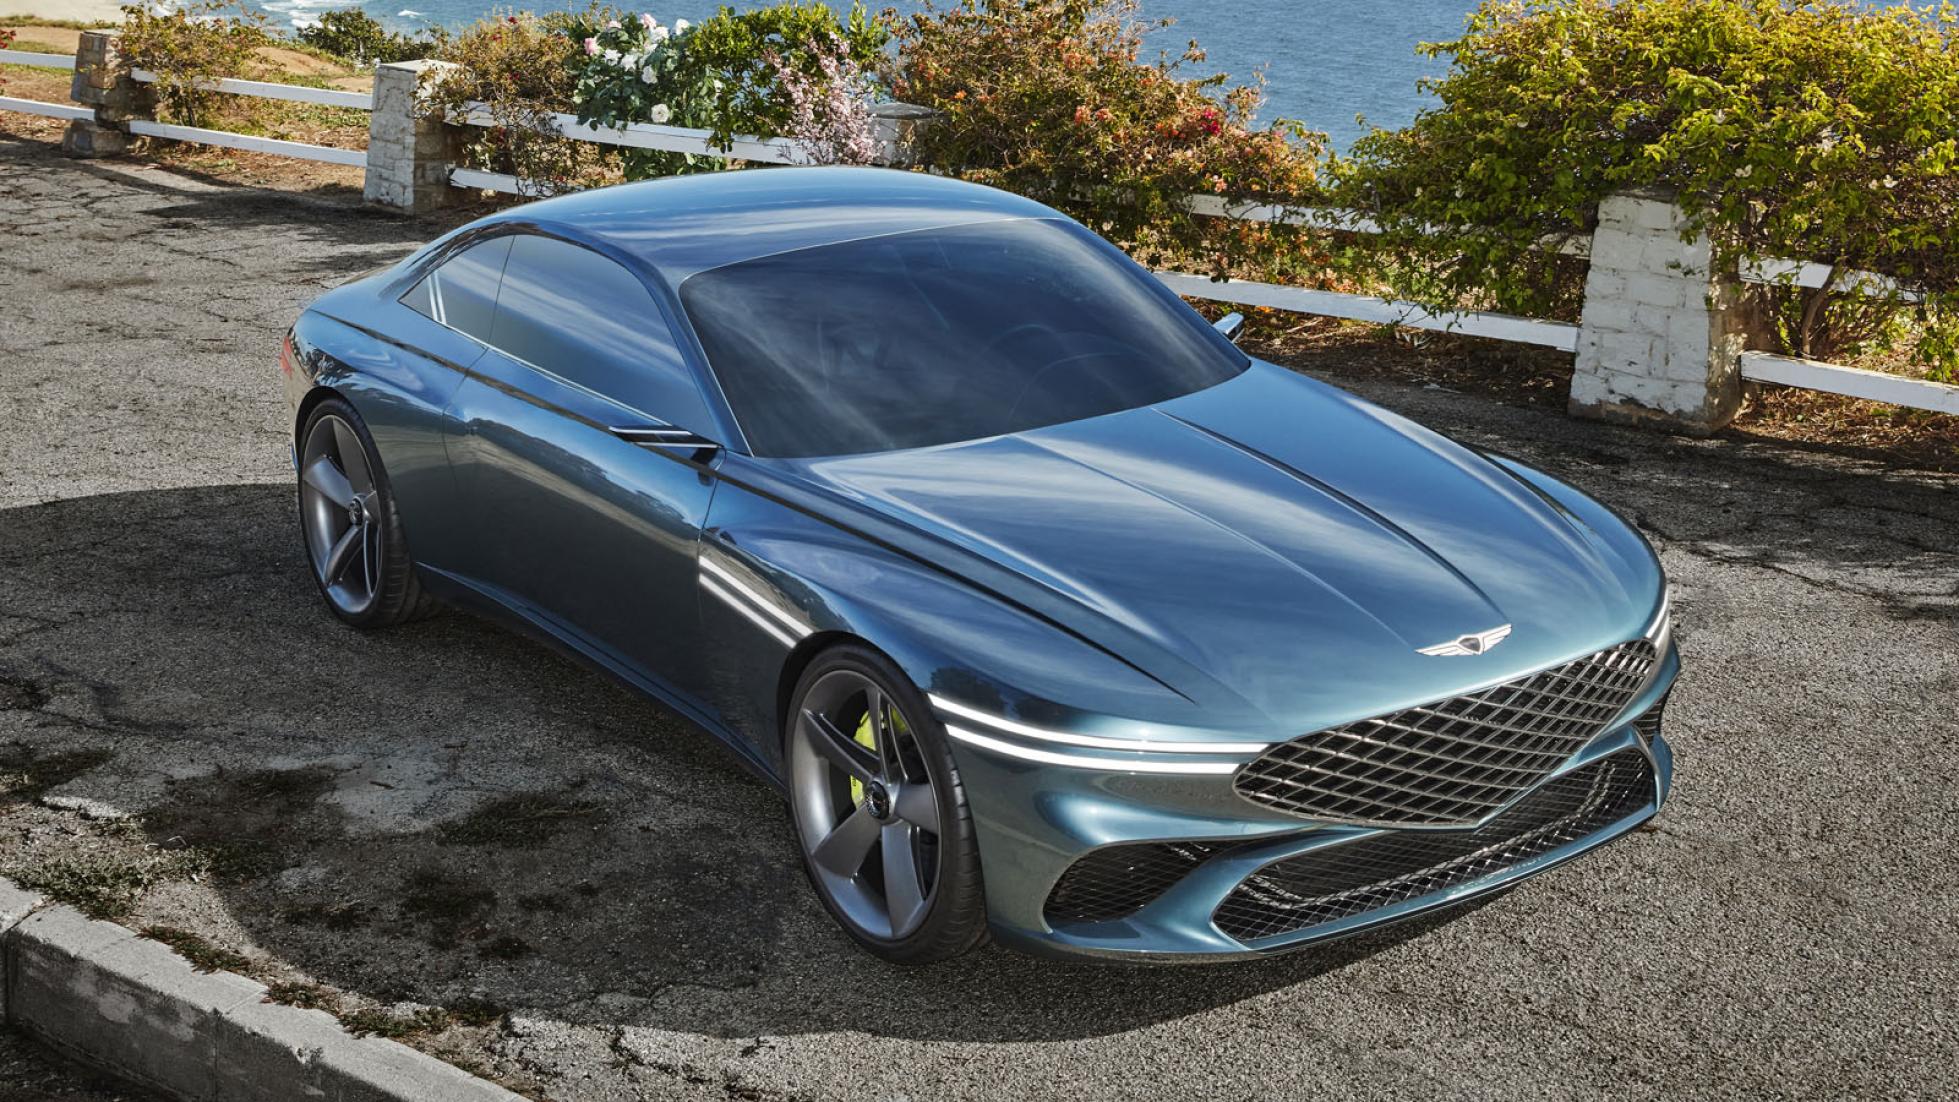 TopGear | The Genesis X Concept is unbelievably gorgeous